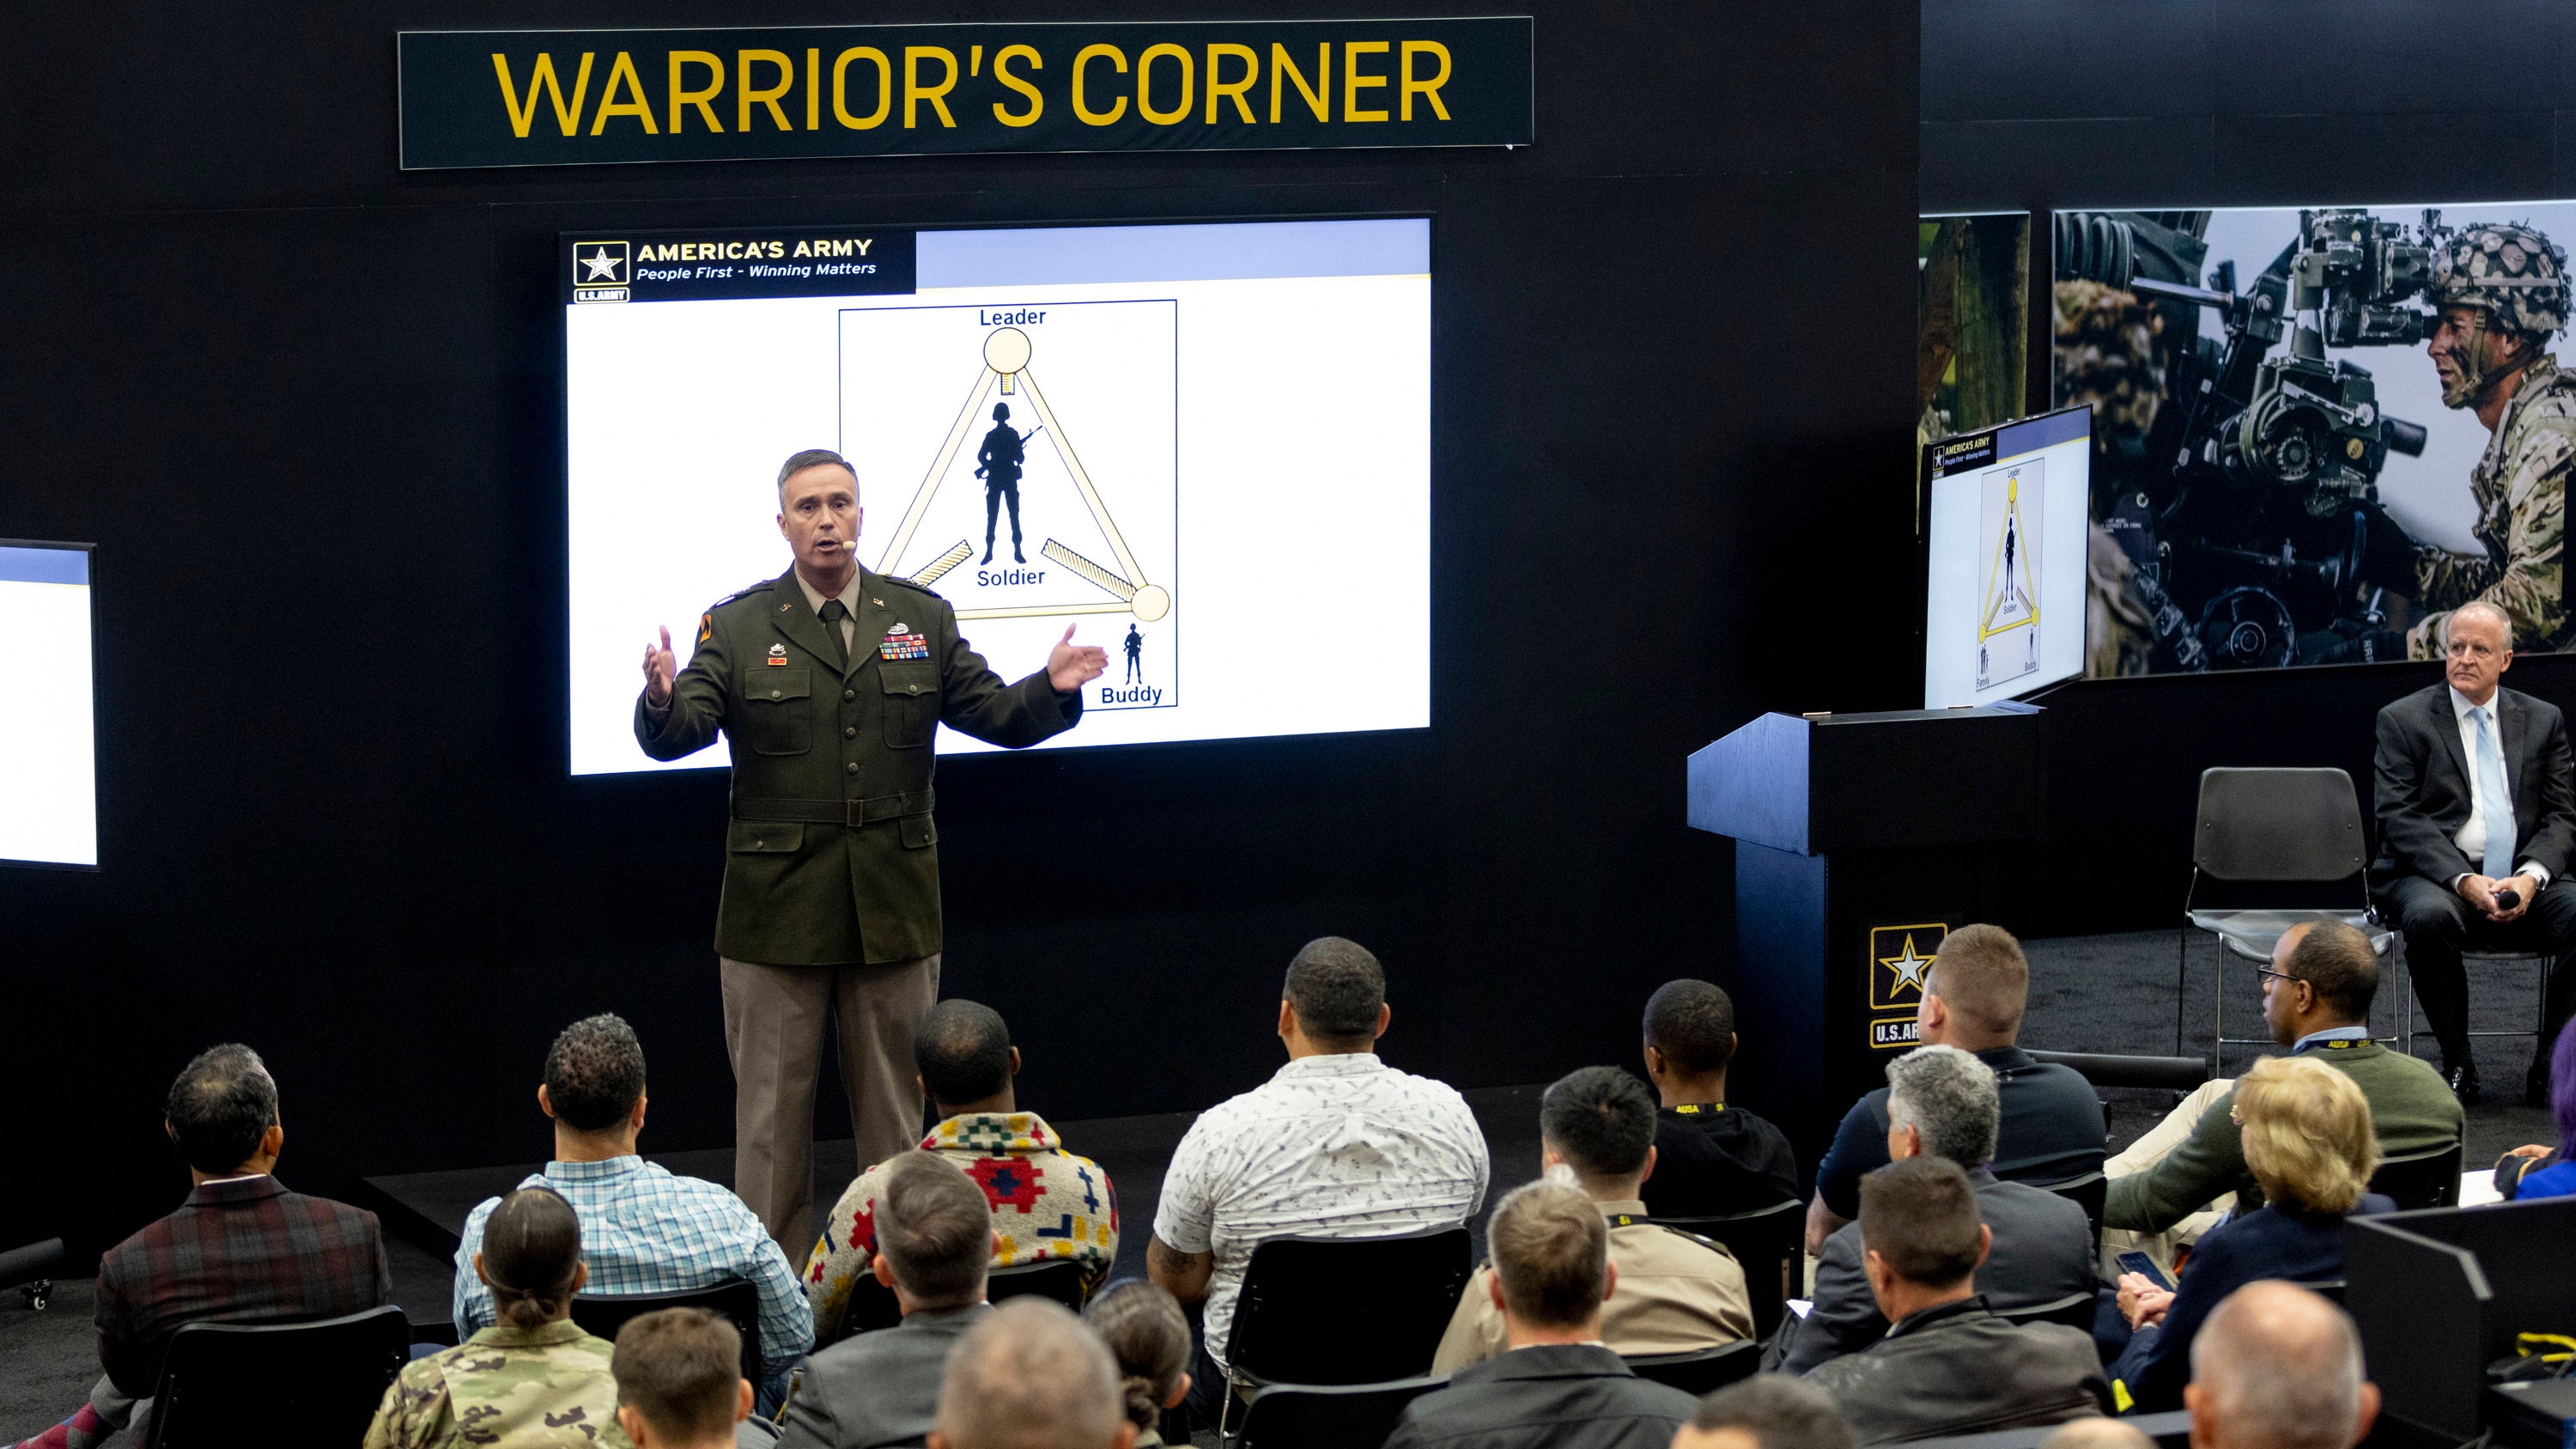 Maj. Gen. Christopher Norrie, director of the People First Task Force, speaks during the People First and Prevention session at the Warriors Corner at the AUSA 2022 Annual Meeting in Washington, D.C., Wednesday, Oct. 12, 2022. (Tasos Katopodis for AUSA)